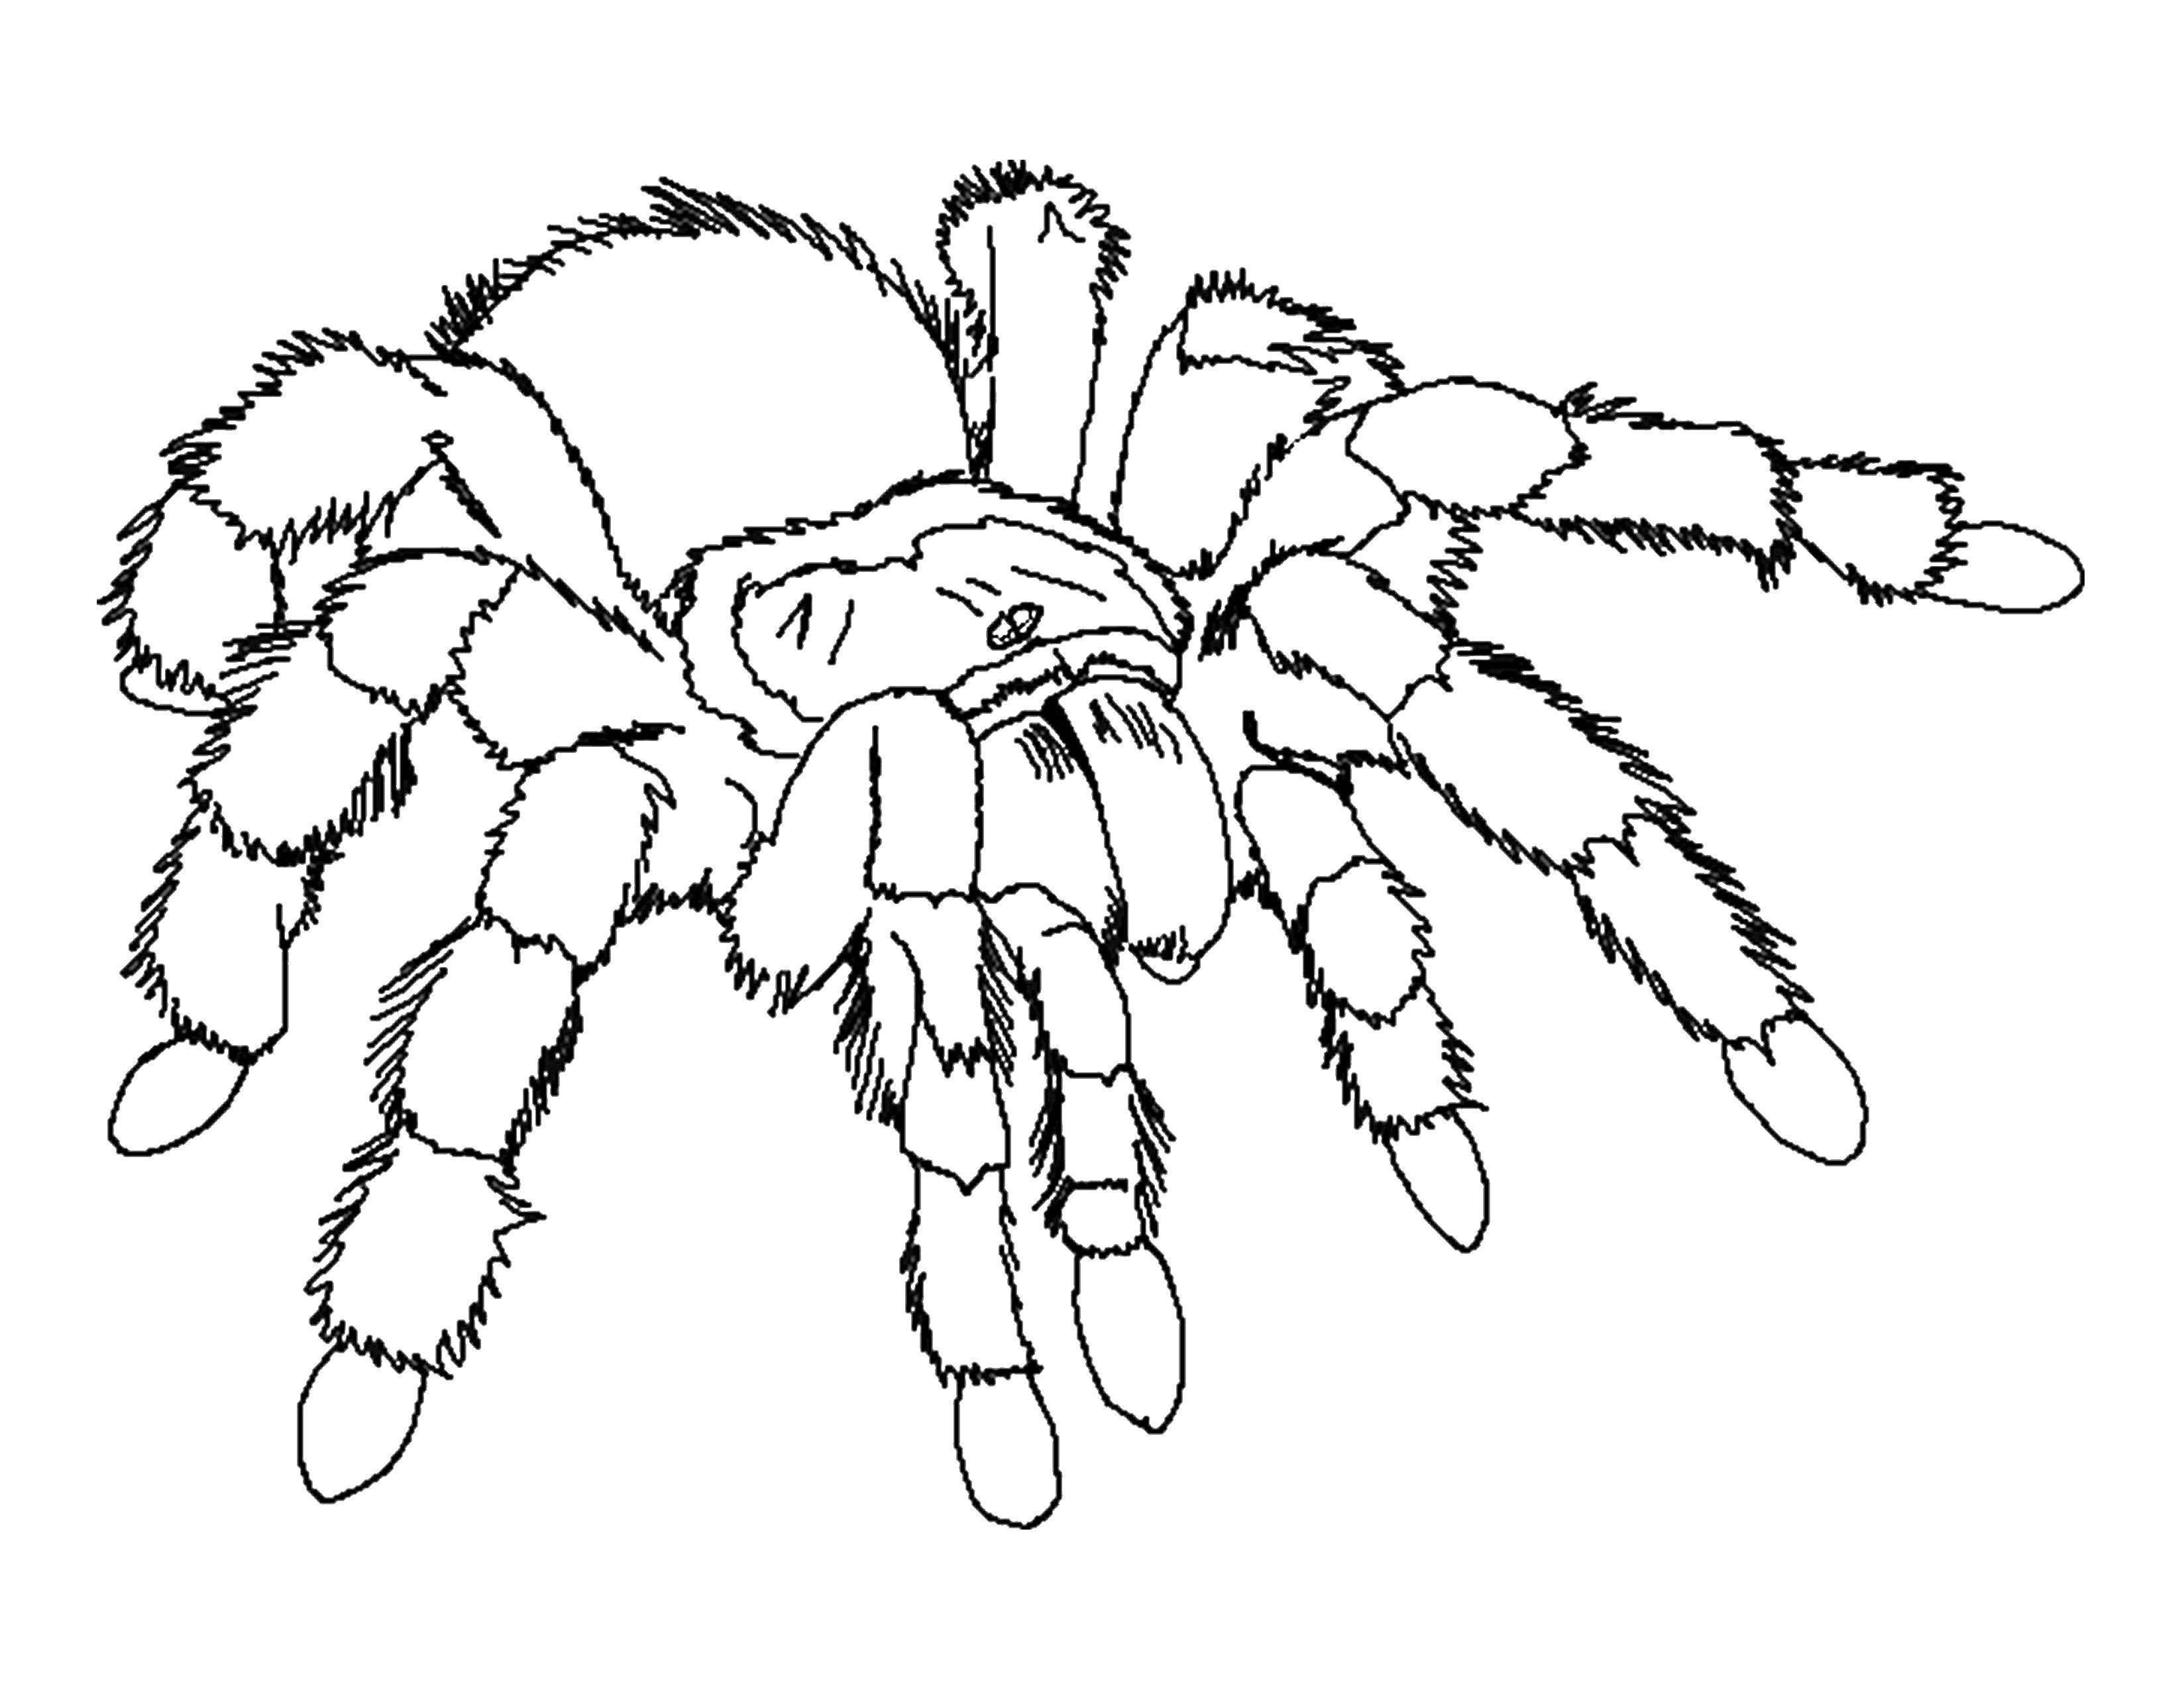 Coloring Tarantula. Category Insects. Tags:  Insects, spider.